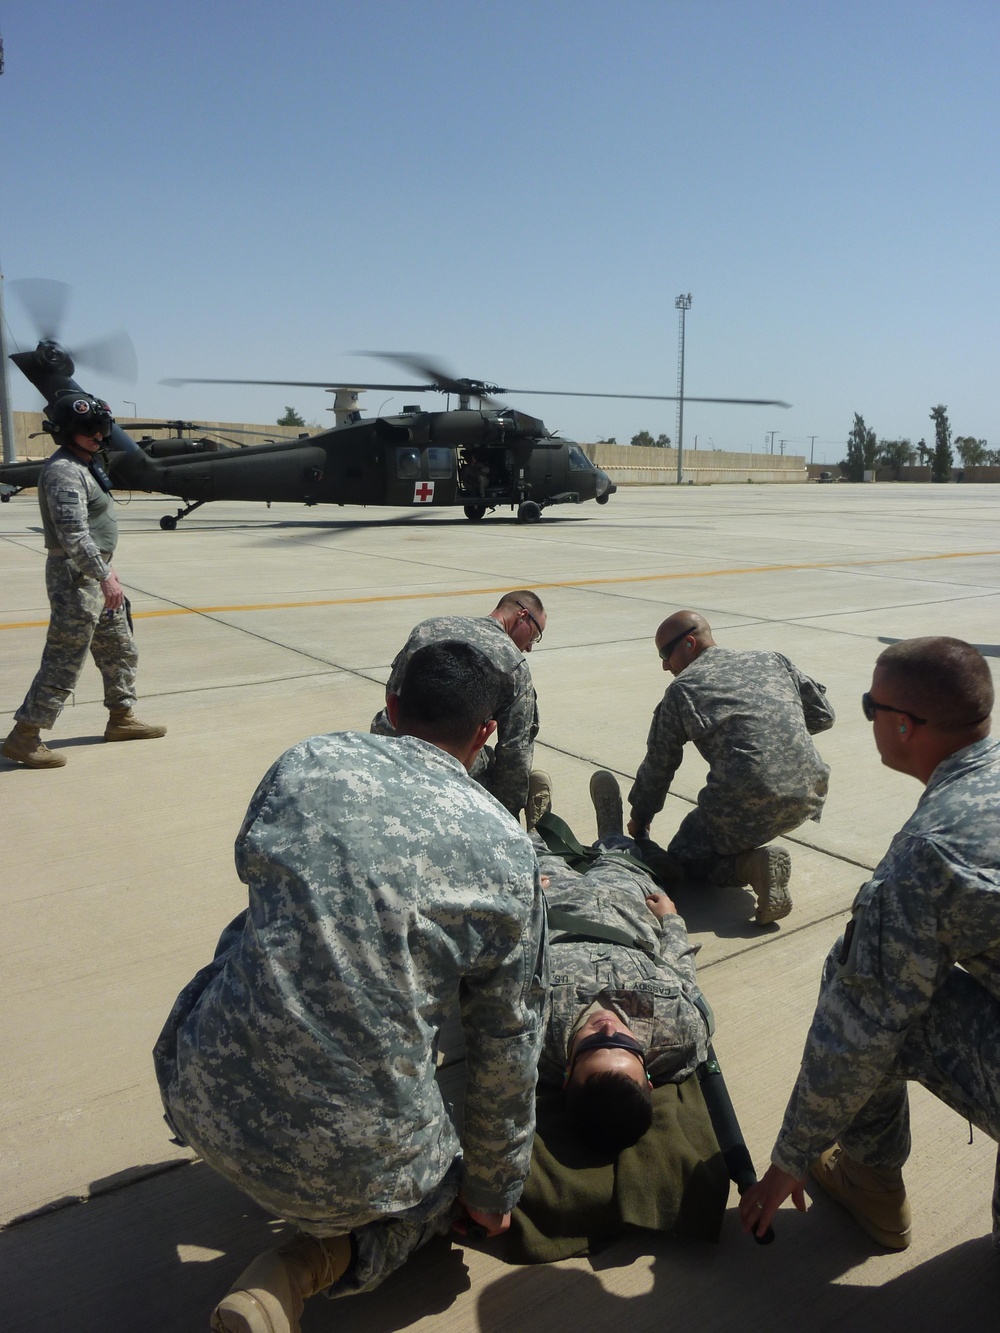 512th personal security detachment trains with MEDEVAC